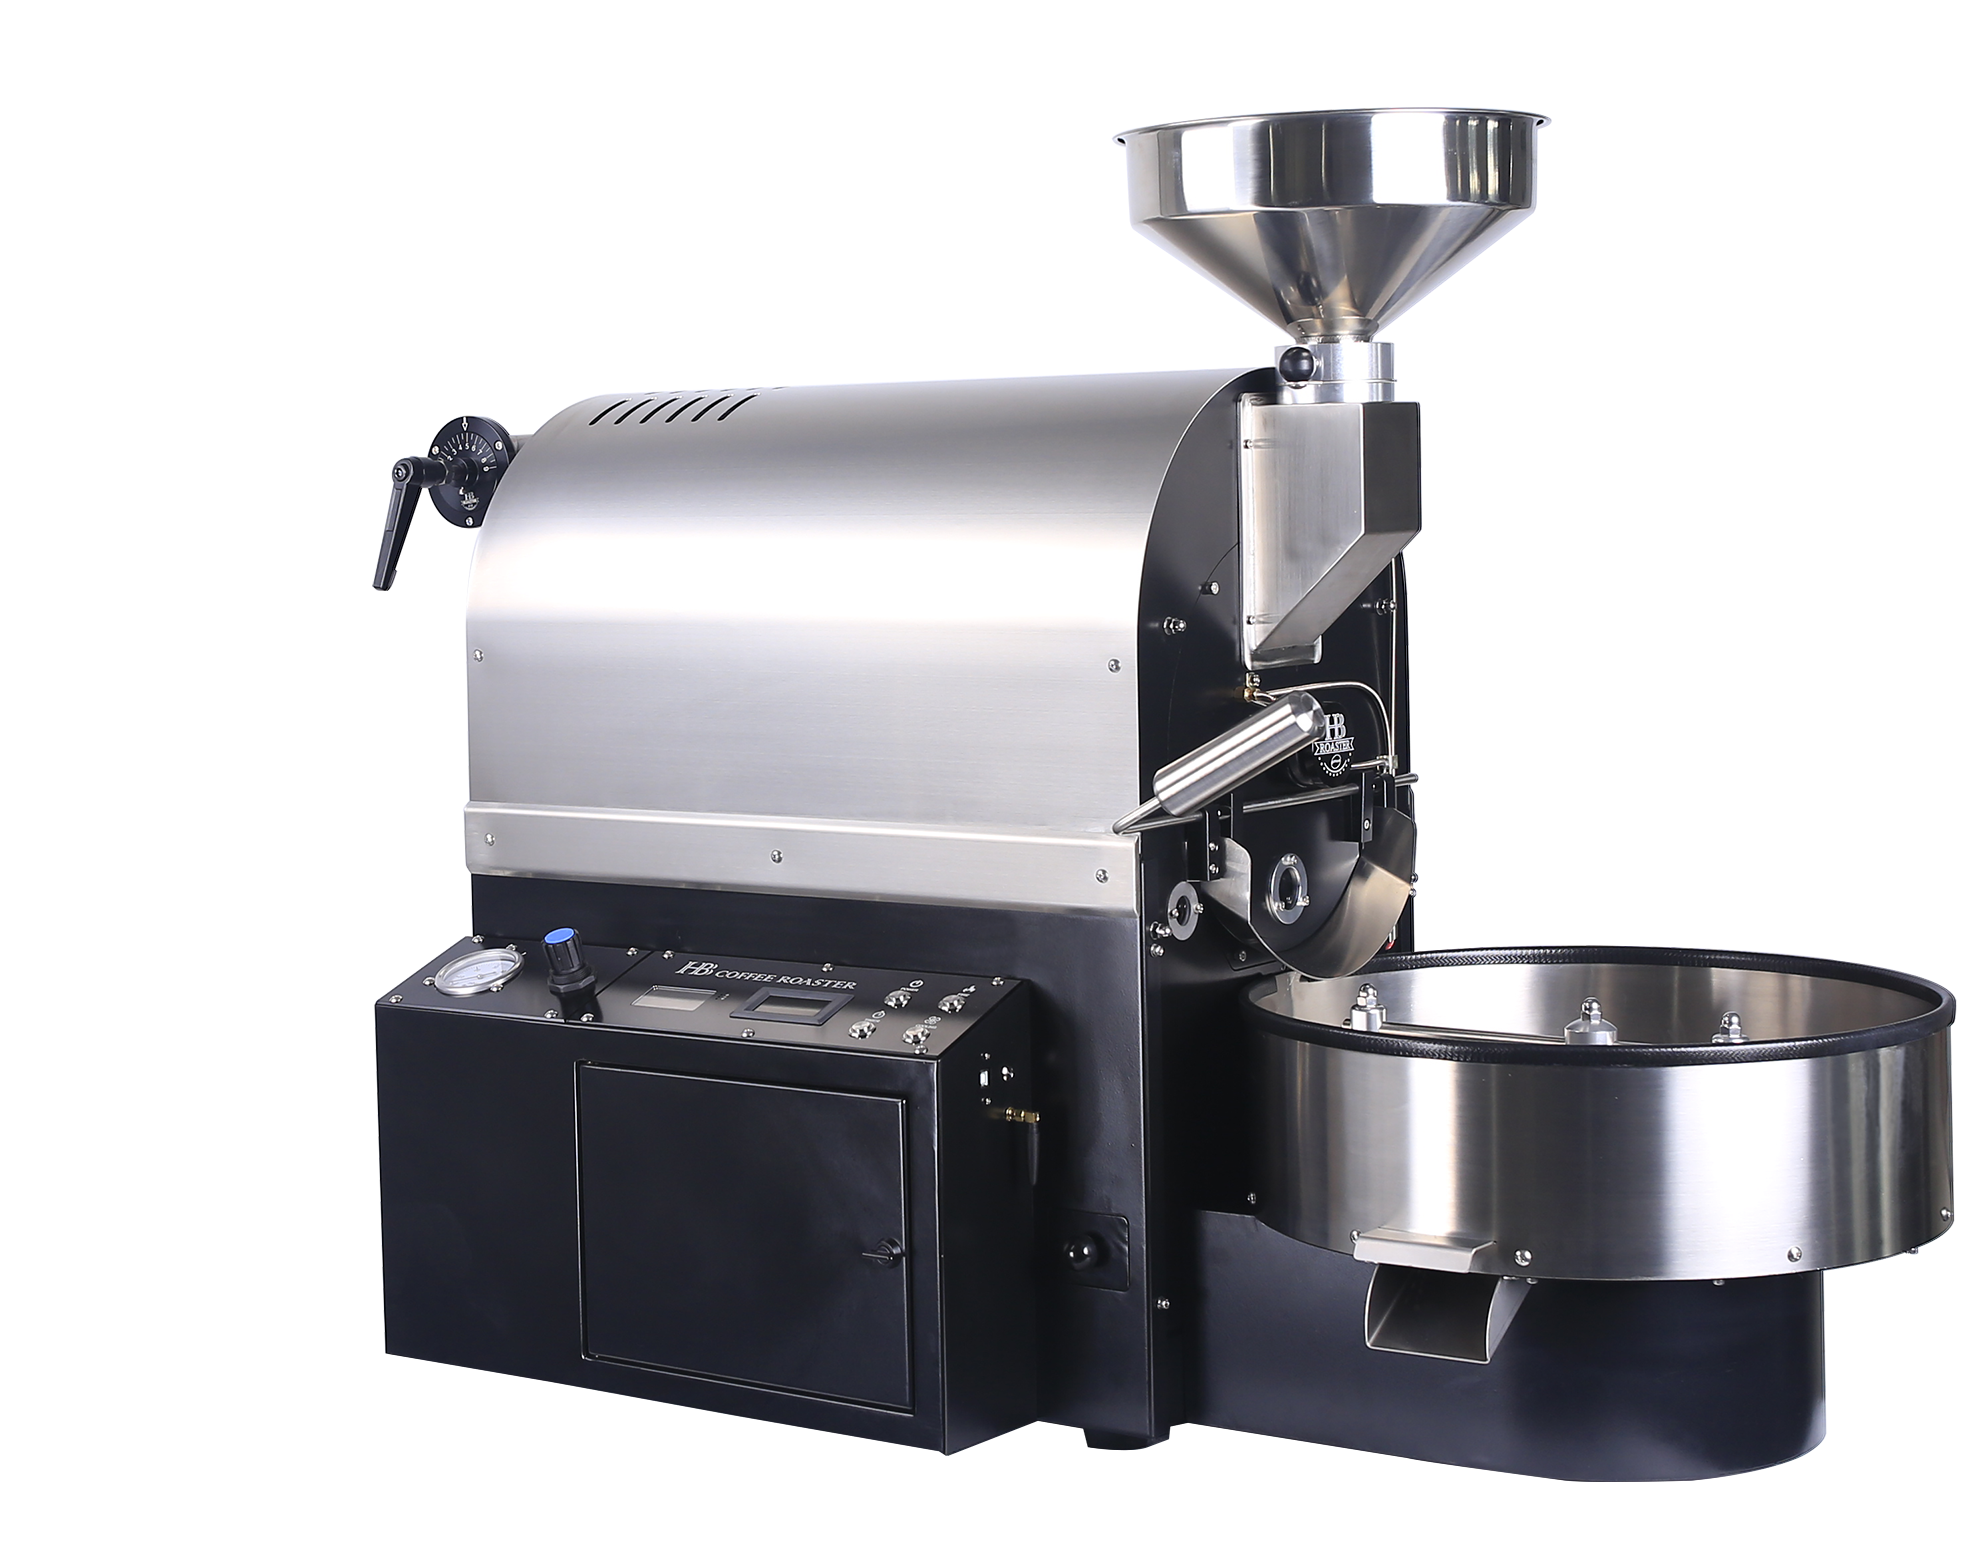 HB coffee roaster gas version 2KG commercial full-automatic semi-hot air air-cooled raw beans baking L2S